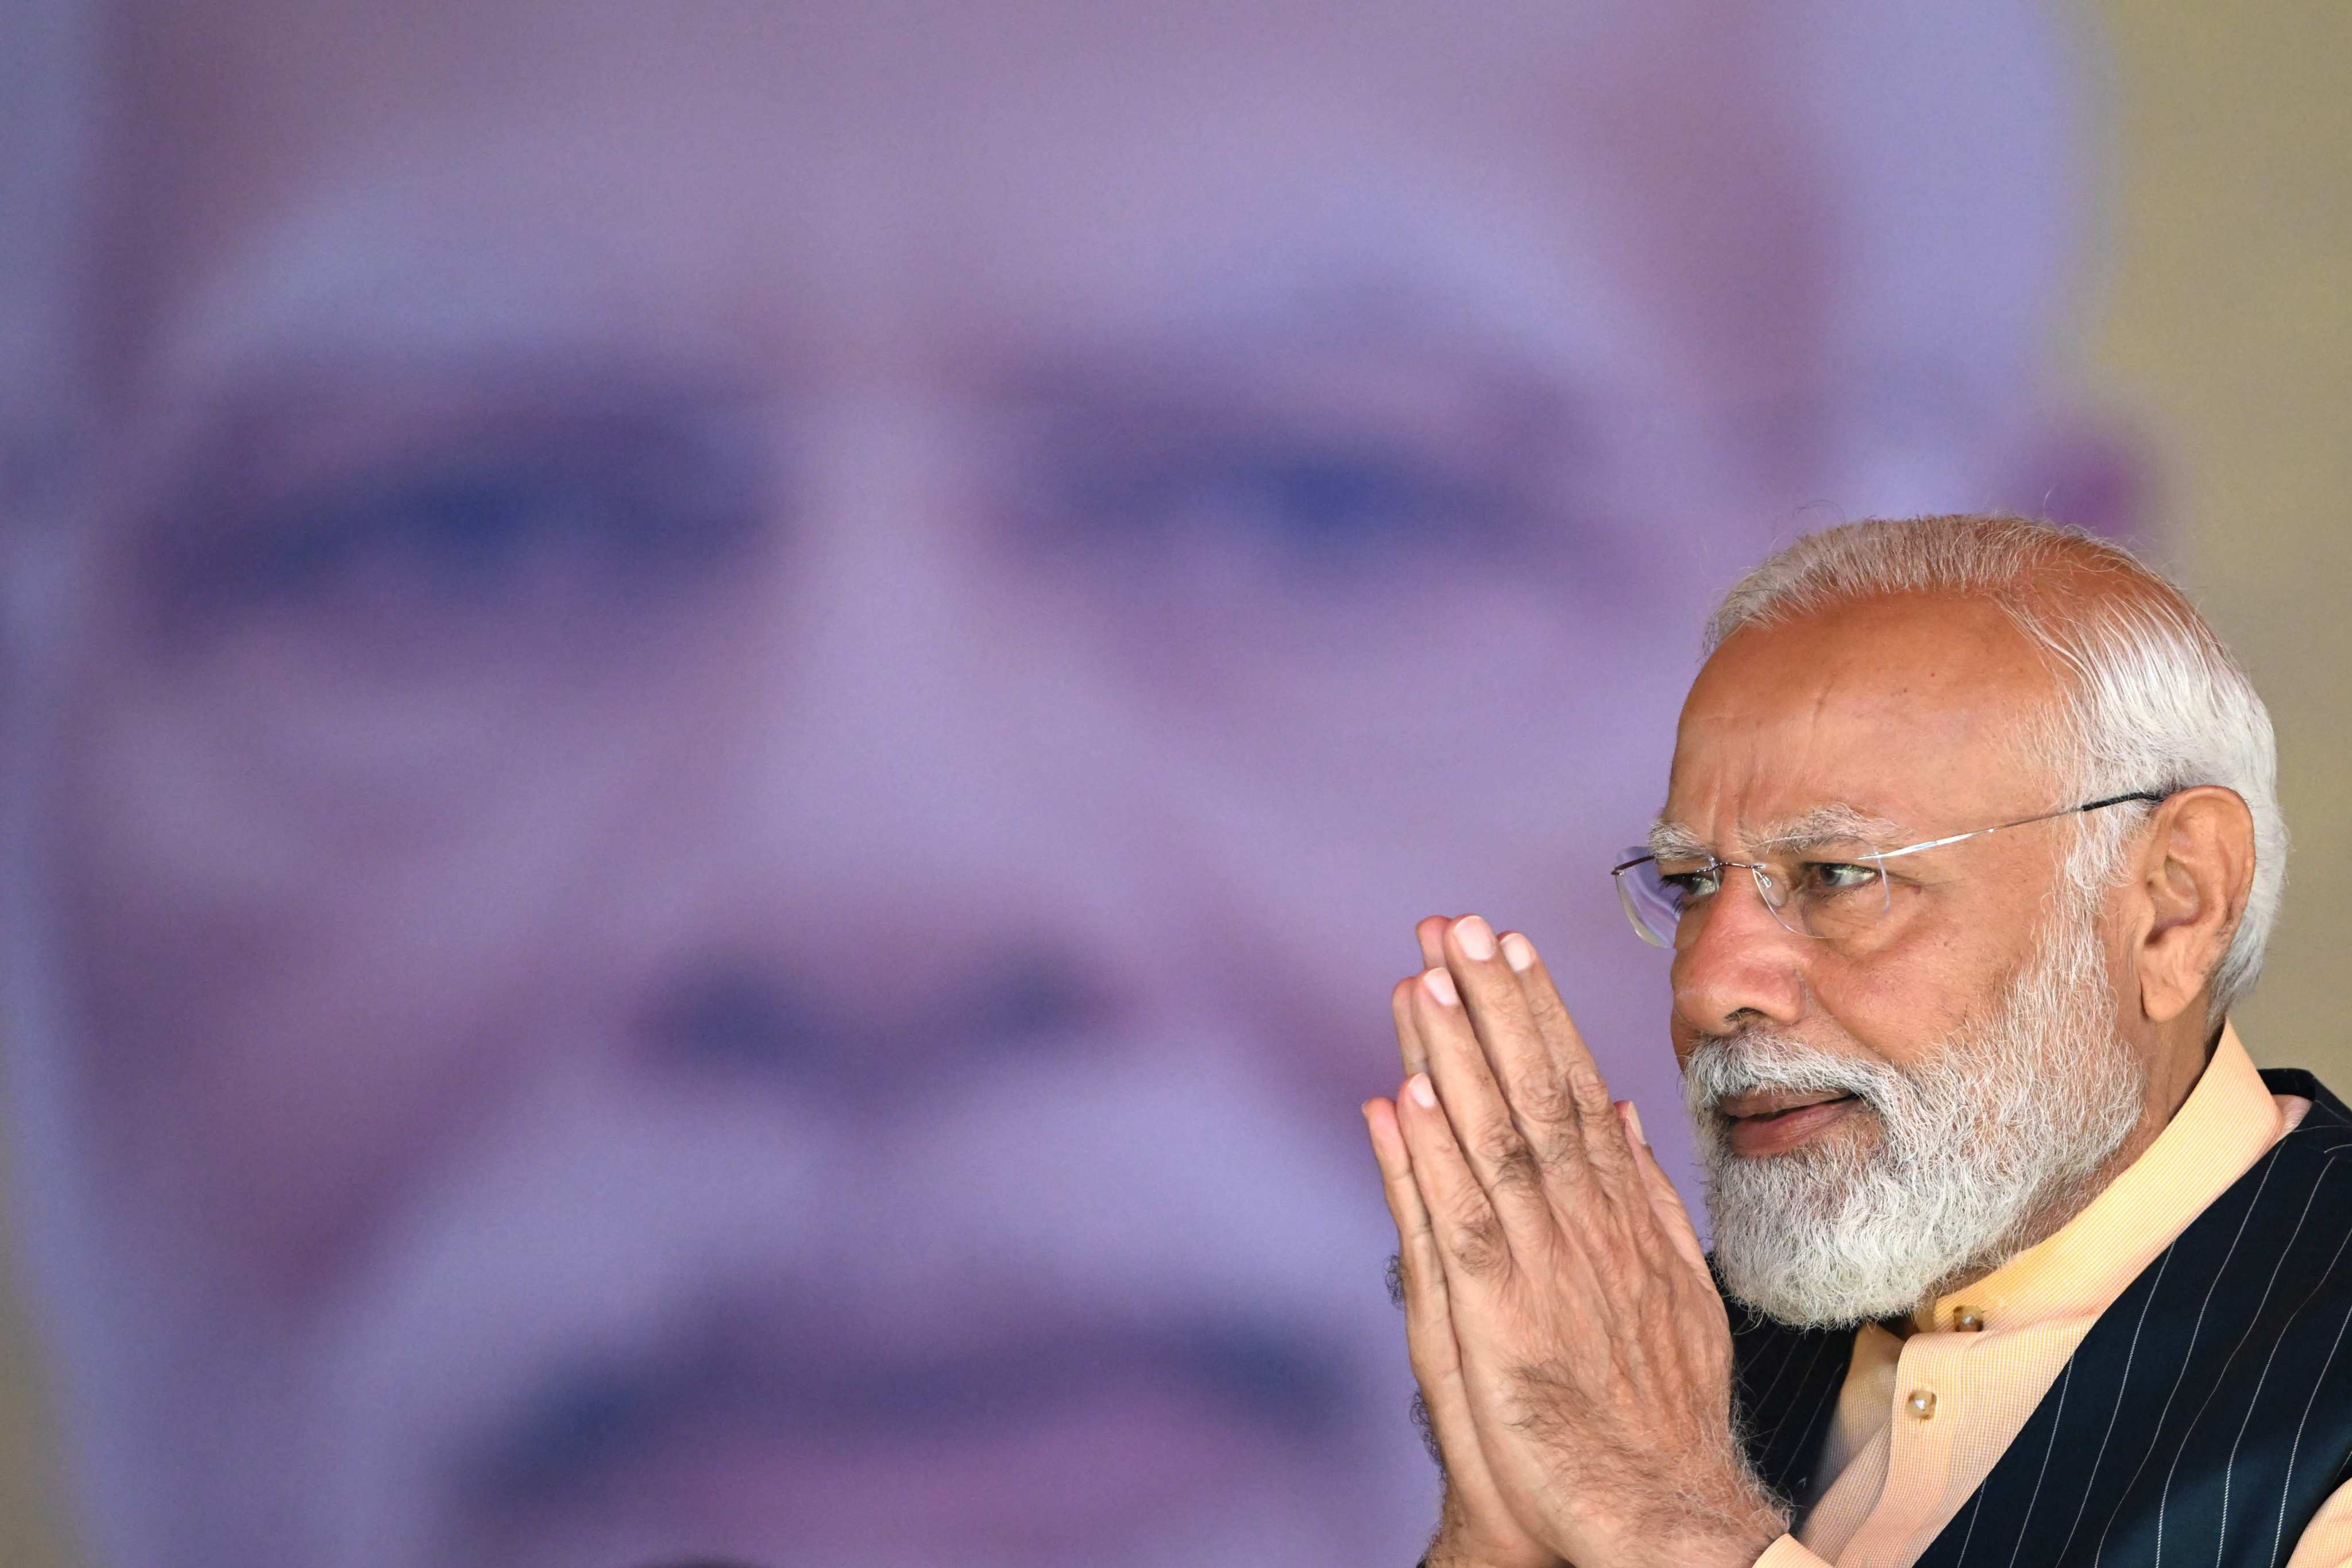 Narendra Modi is using India’s growing appeal as the world’s fastest-growing major economy and alternative to China to clinch free trade pacts. Photo: AFP